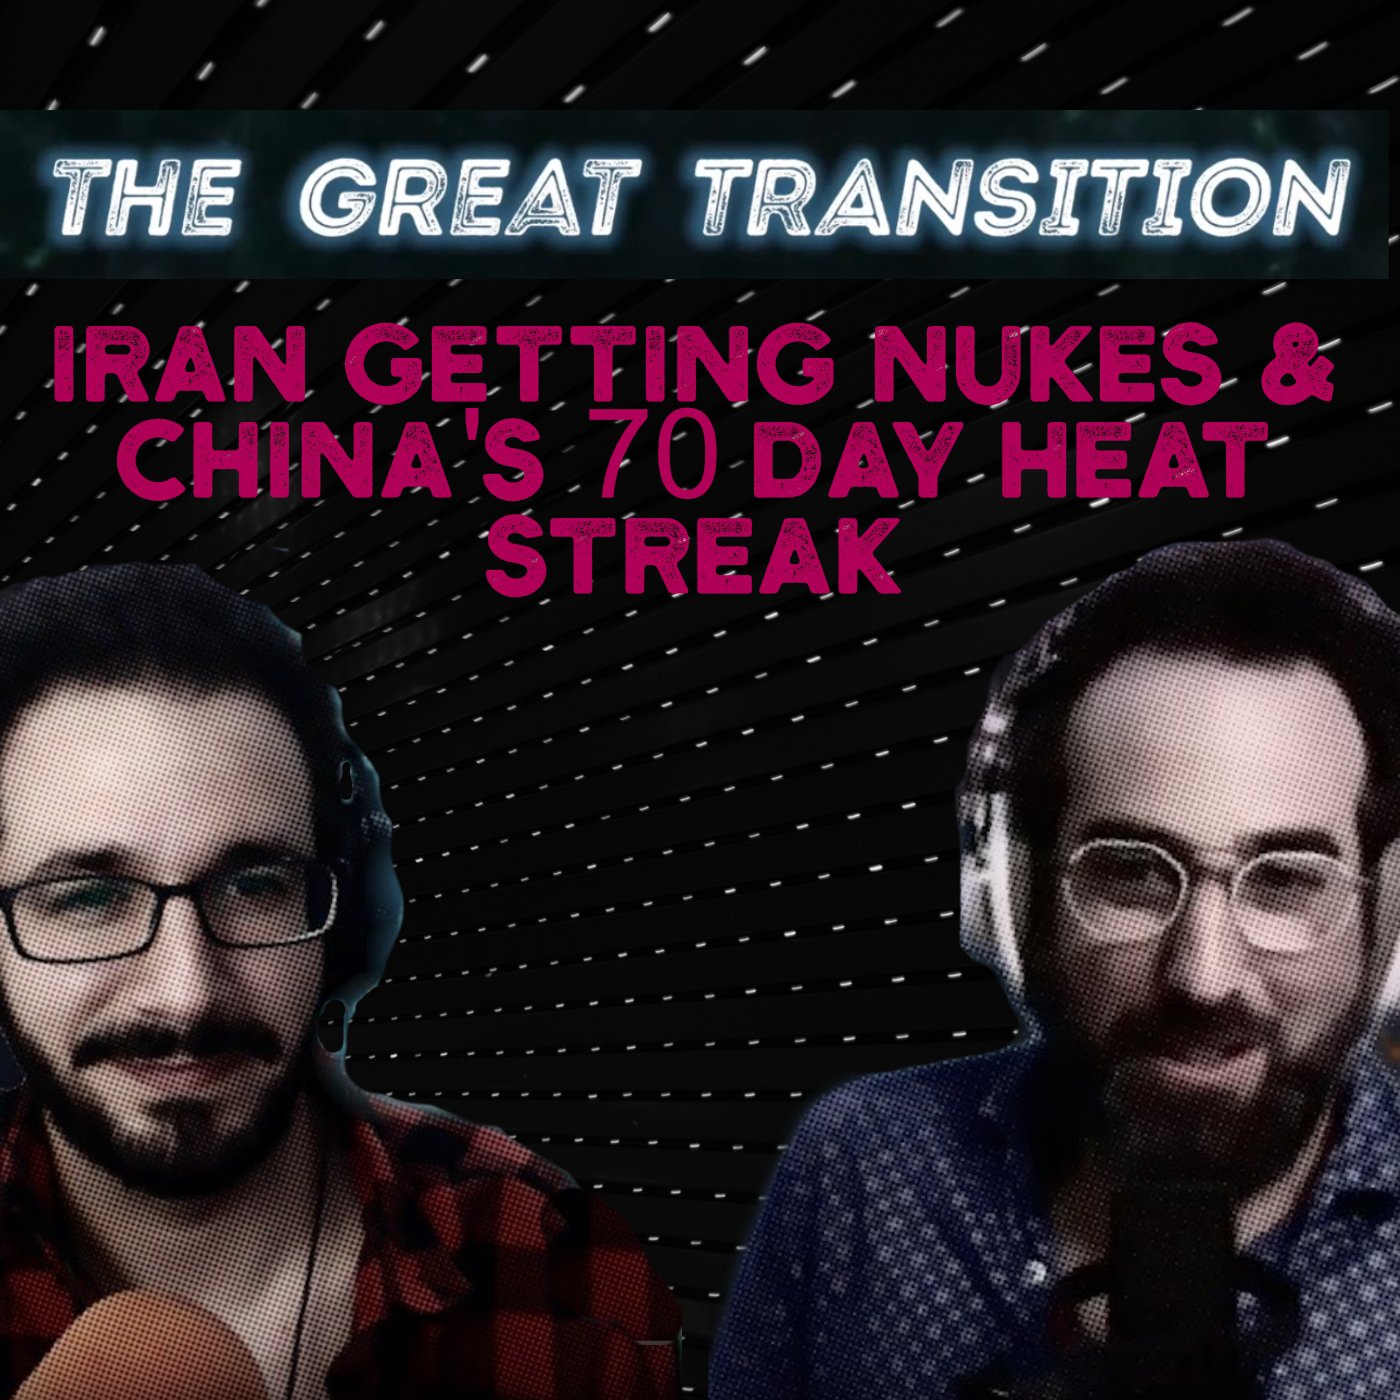 The Great Transition - Iran Getting Nukes & China’s 70 Day Heat Streak